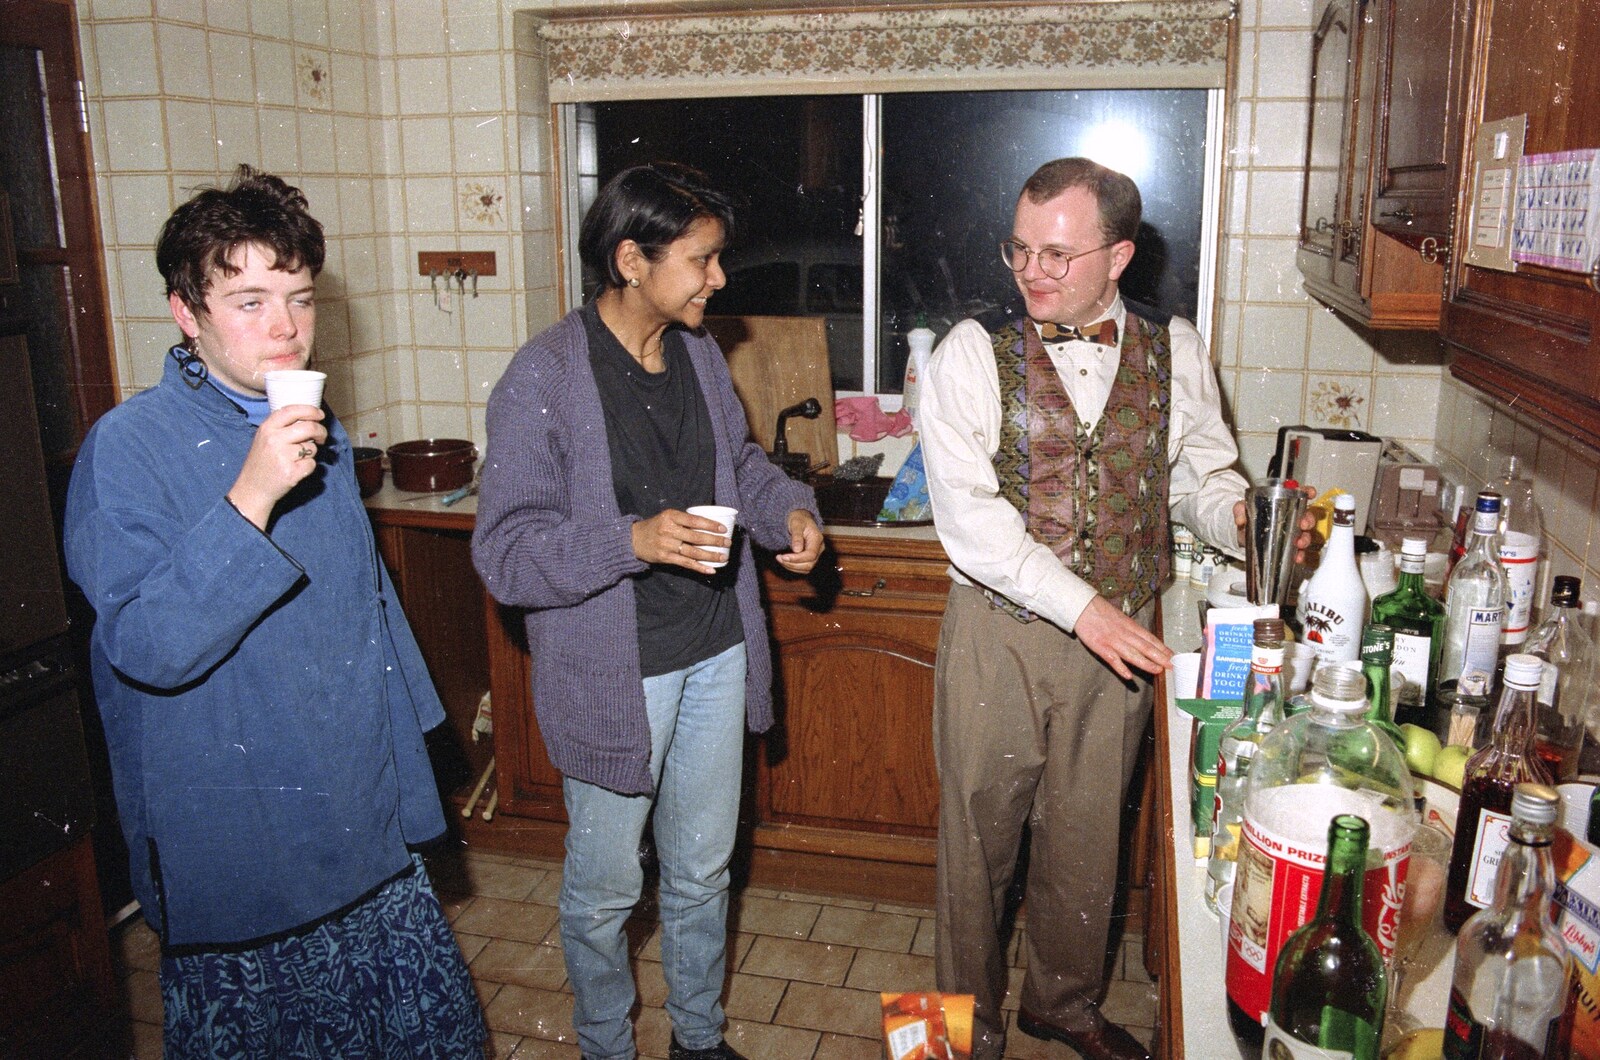 Hamish's Oxford Party, Oxfordshire - 25th April 1992: The action in the kitchen